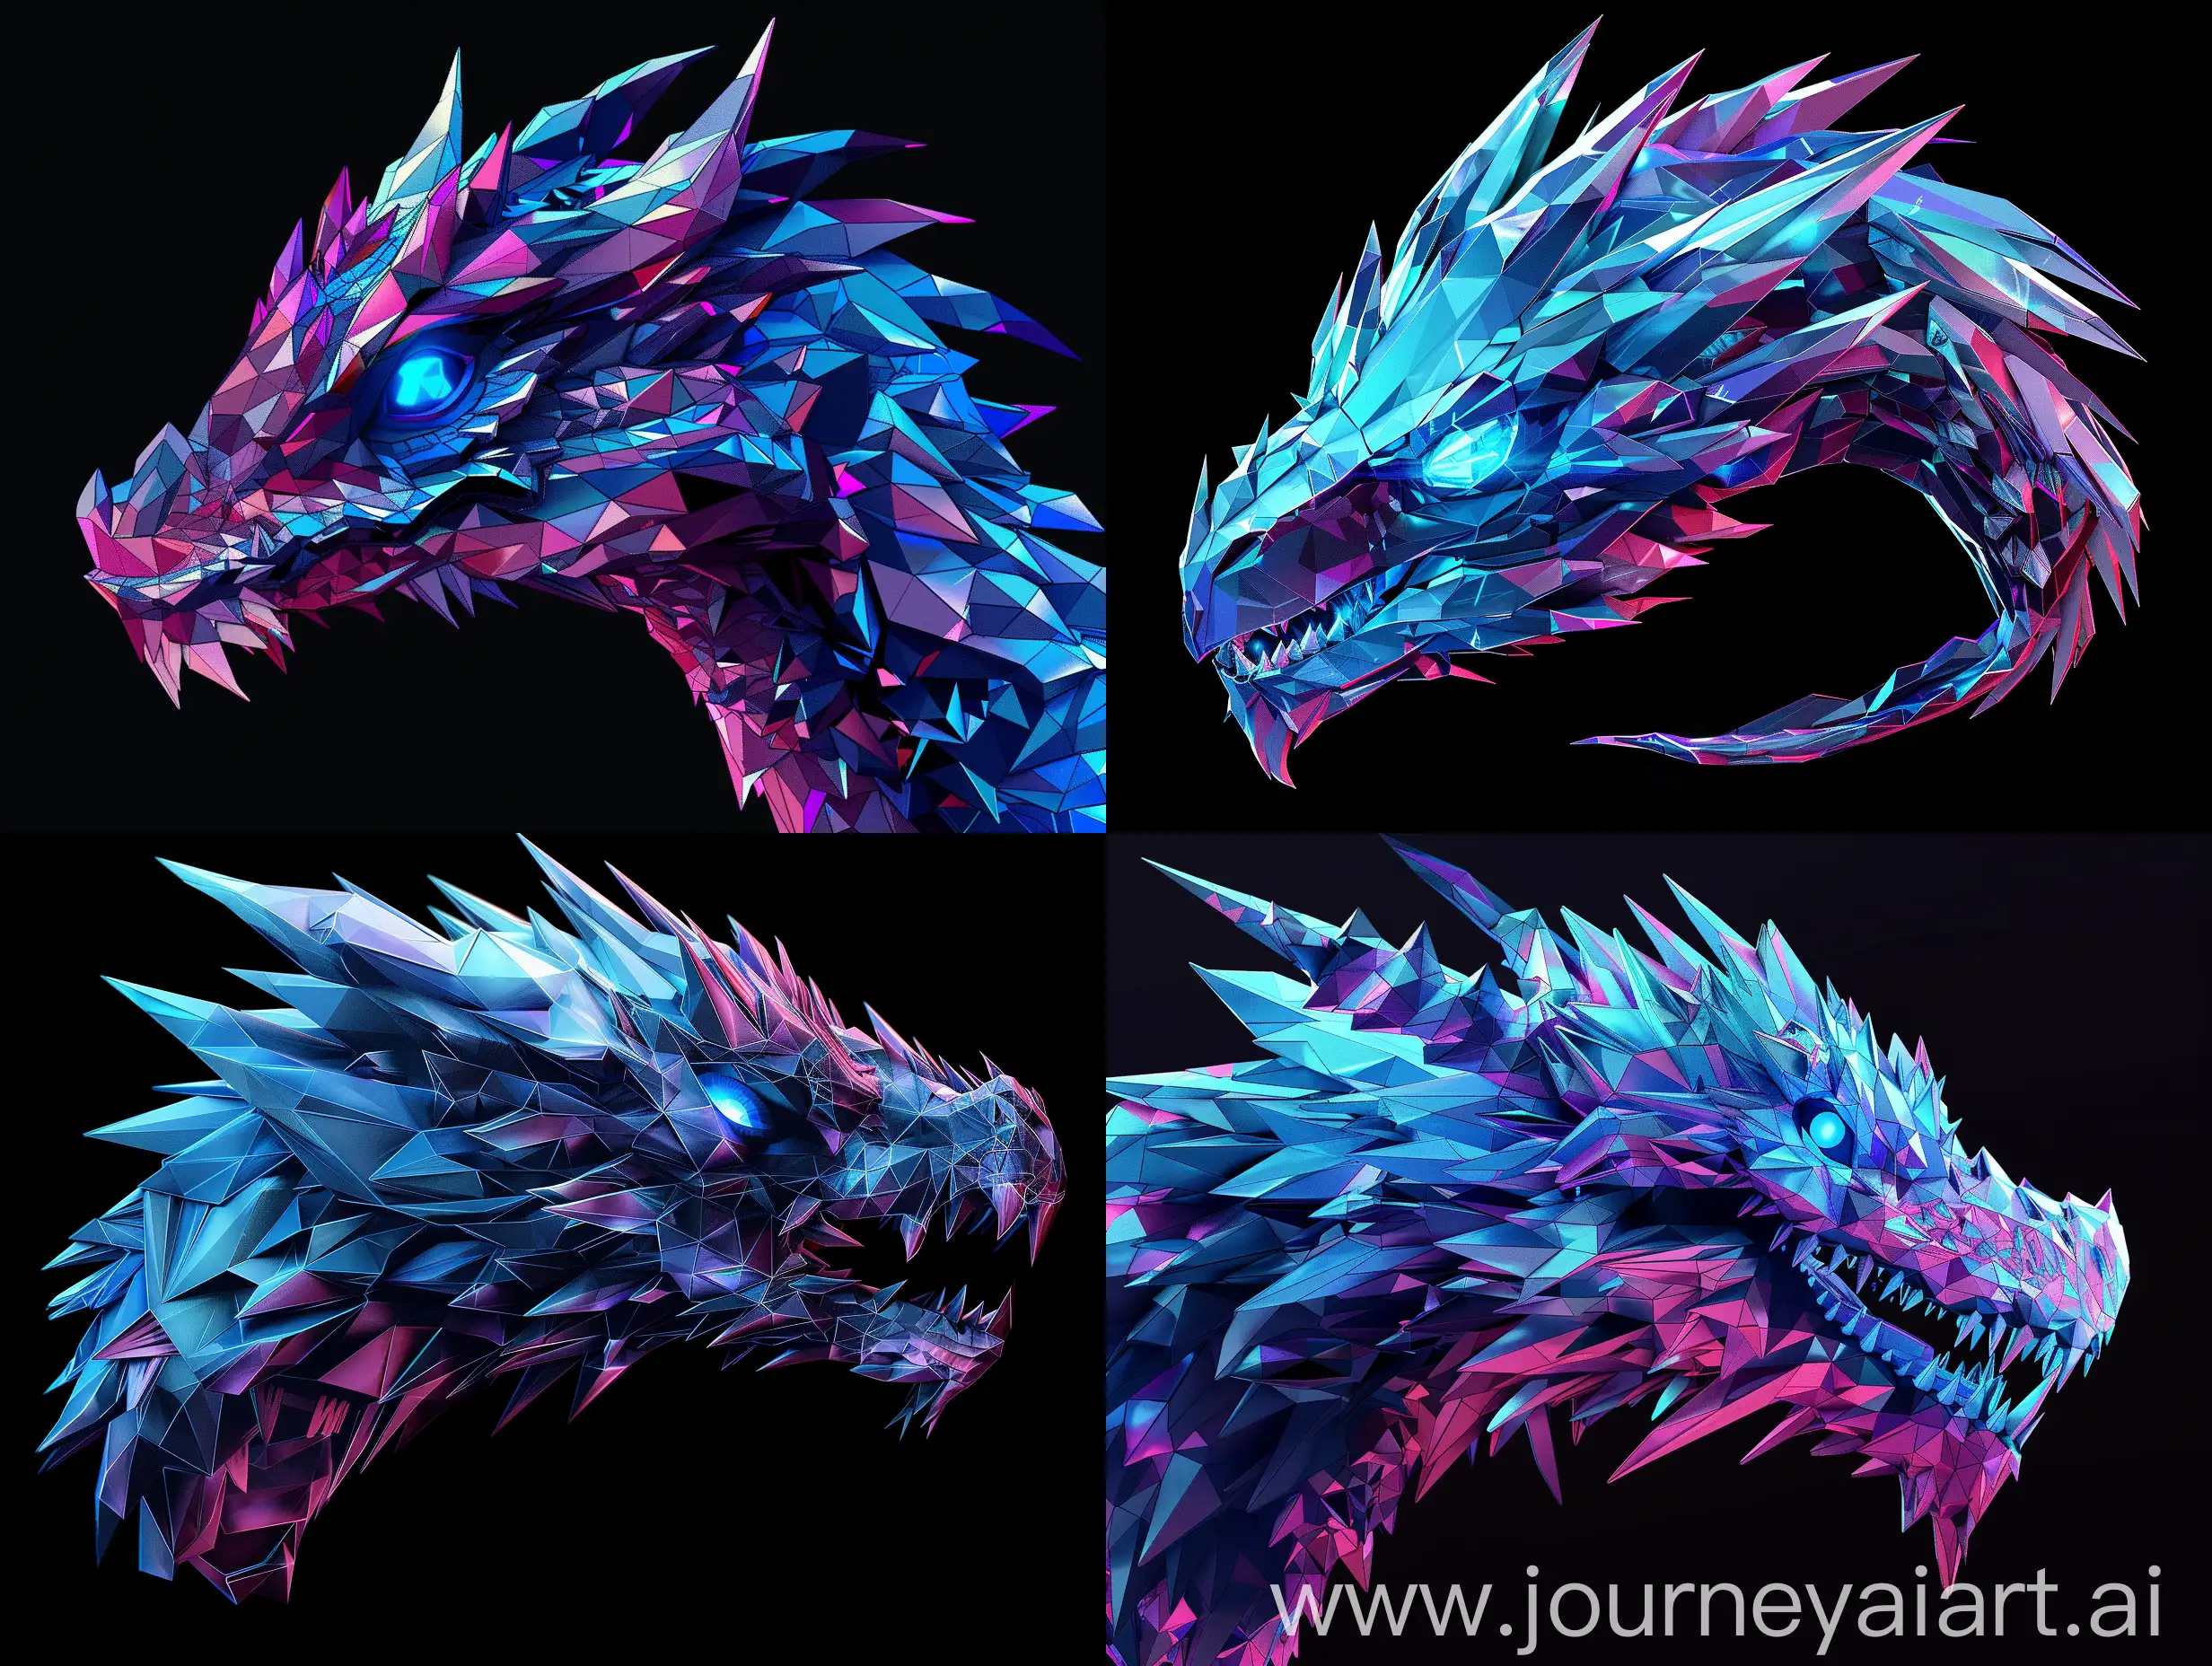 Create a highly detailed image of a fantastical dragon head in a low poly art style. The dragon should have sharp, angular features with a geometric, crystalline structure. The color palette should consist of vibrant shades of blue, purple, and pink, creating a dynamic and visually striking contrast. The dragon's eye should be prominently visible, glowing intensely with a deep blue hue. The background should be pure black to enhance the vivid colors and intricate details of the dragon's faceted surface